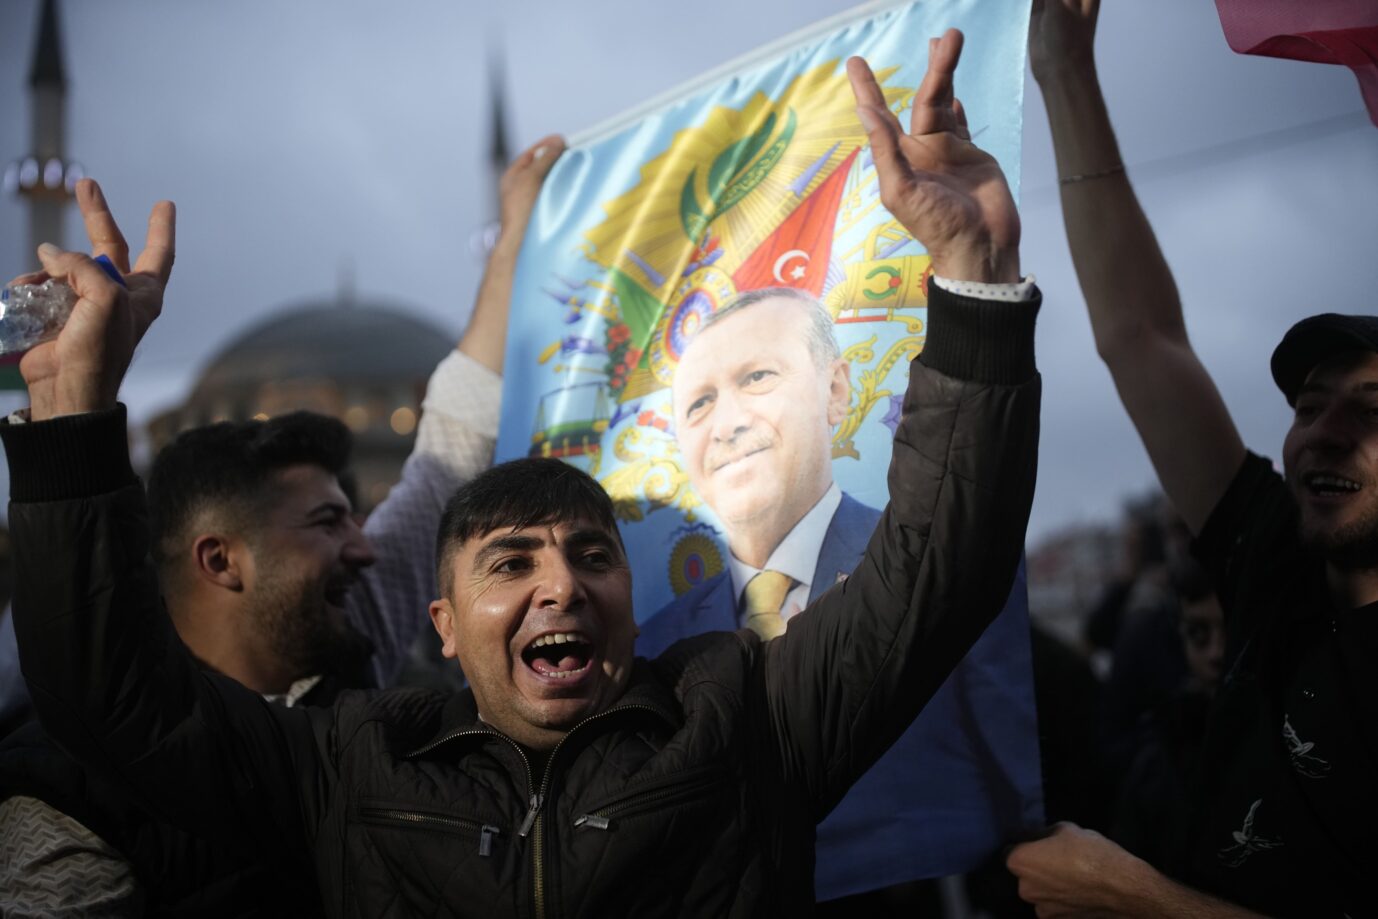 Erdogan's supporters celebrate ahead of his election victory.